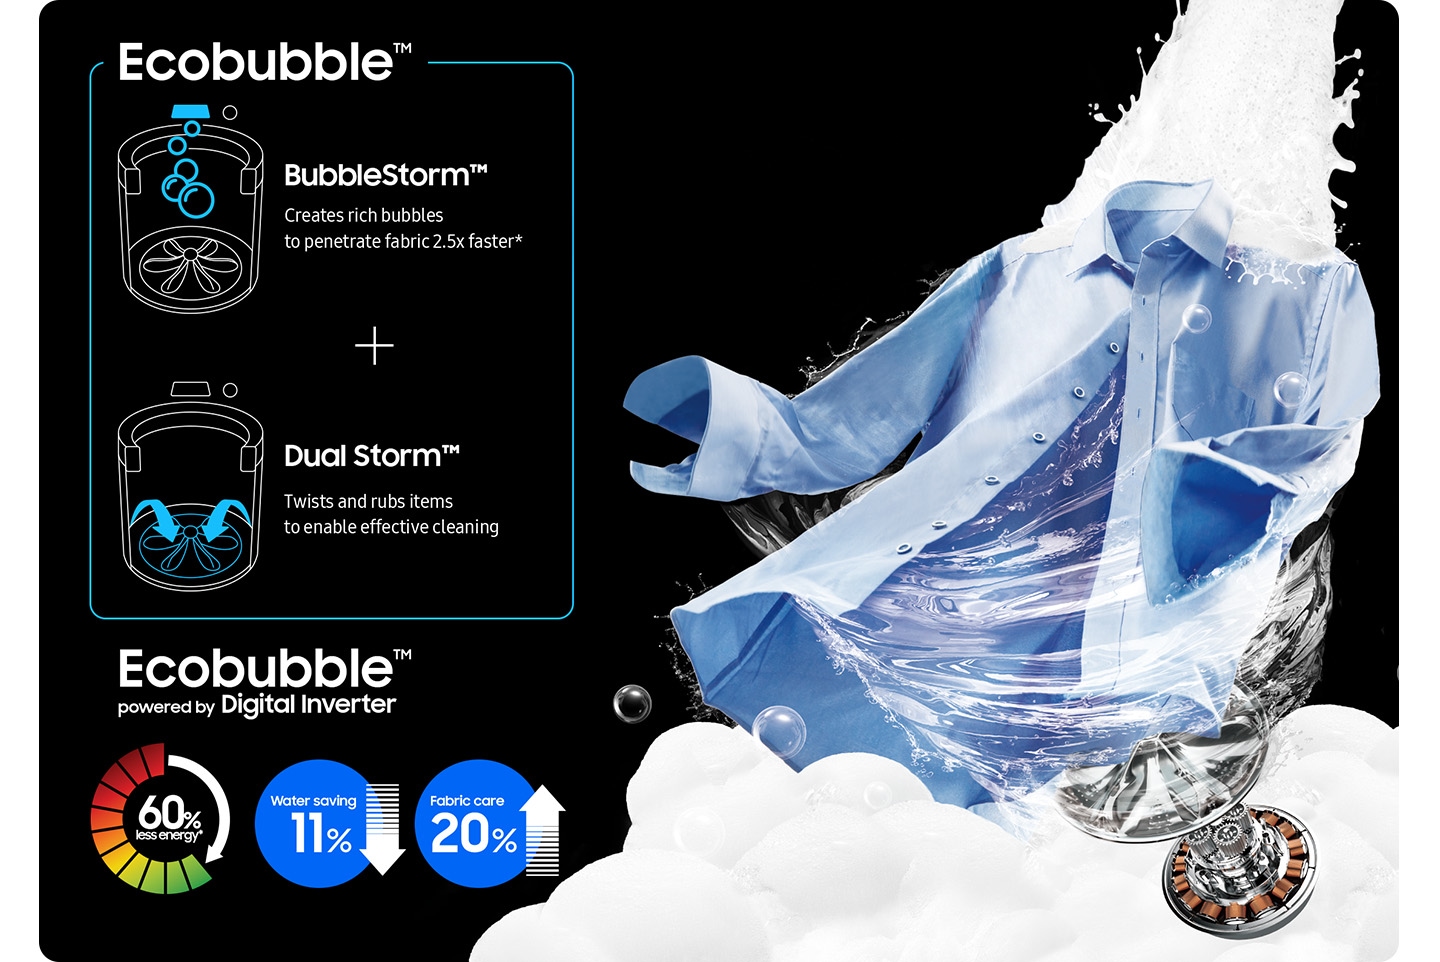 A strong stream of water, foam, and a Digital Inverter Technology motor are washing a blue shirt. Bubblestorm™ creates rich bubbles to penetrate fabric 2.5x faster* and Dual Storm™ twists and rubs items to enable effective cleaning. Ecobubble™ powered by Digital Inverter, saves 60% of energy, 11% of water and cares better 20% of fabric.